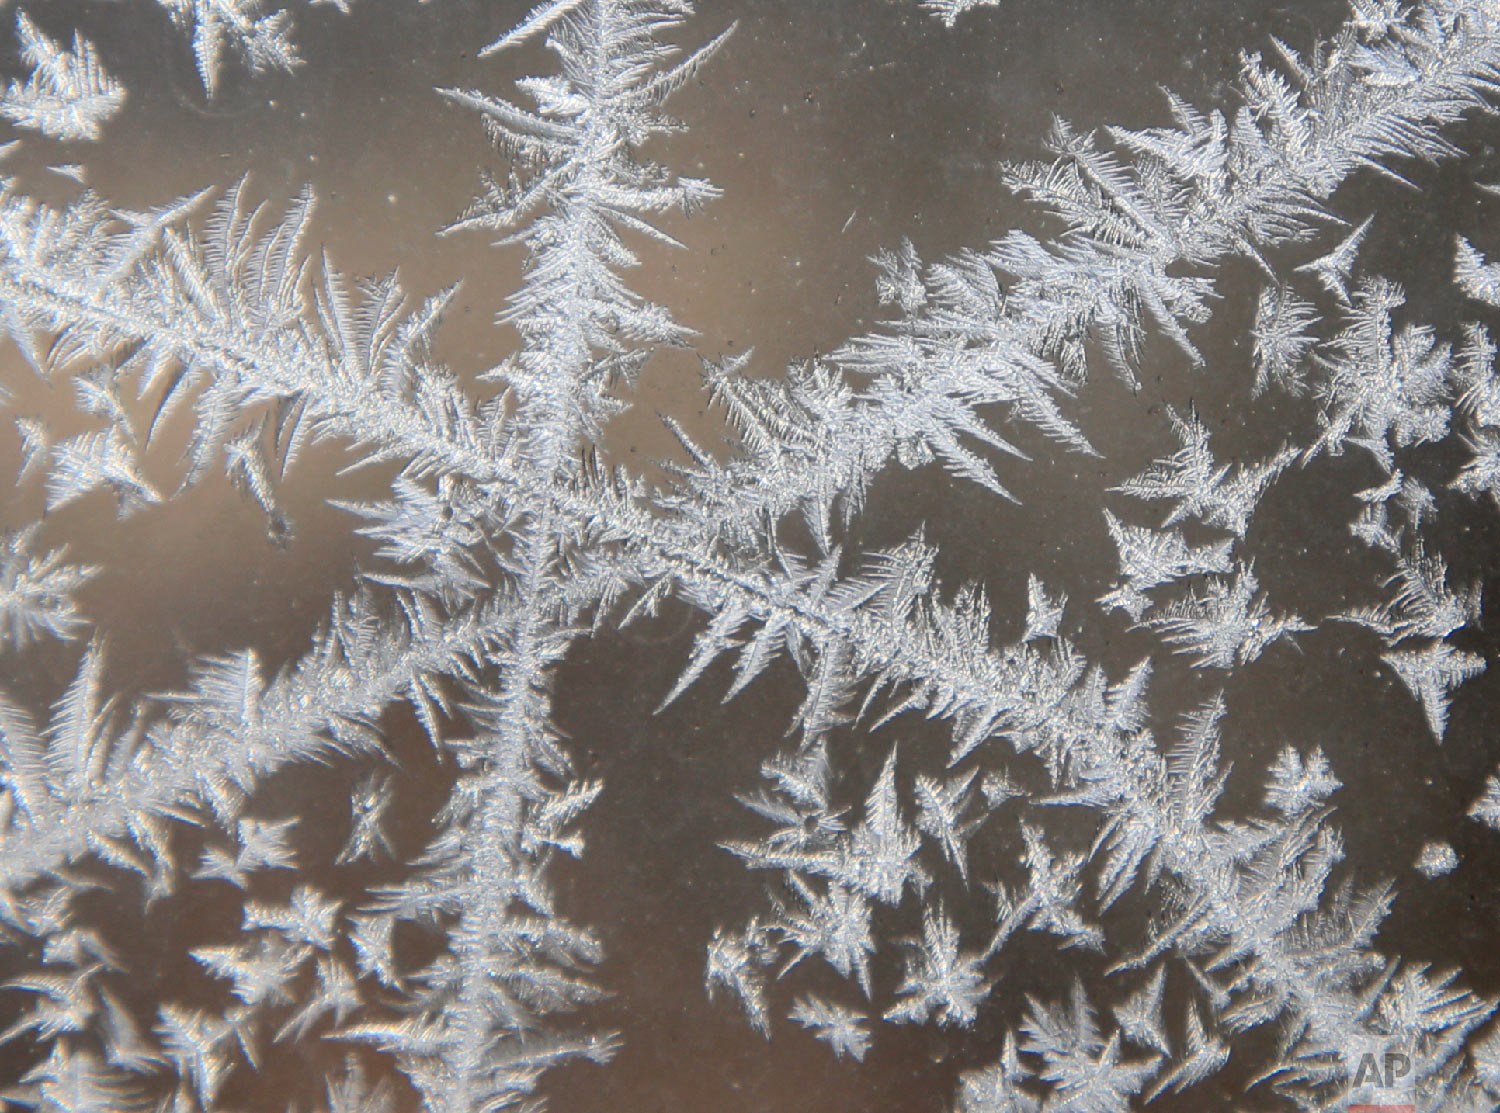  Frost forms on a window in Lawrence, Kan., Wednesday, Jan. 30, 2019. (AP Photo/Orlin Wagner) 